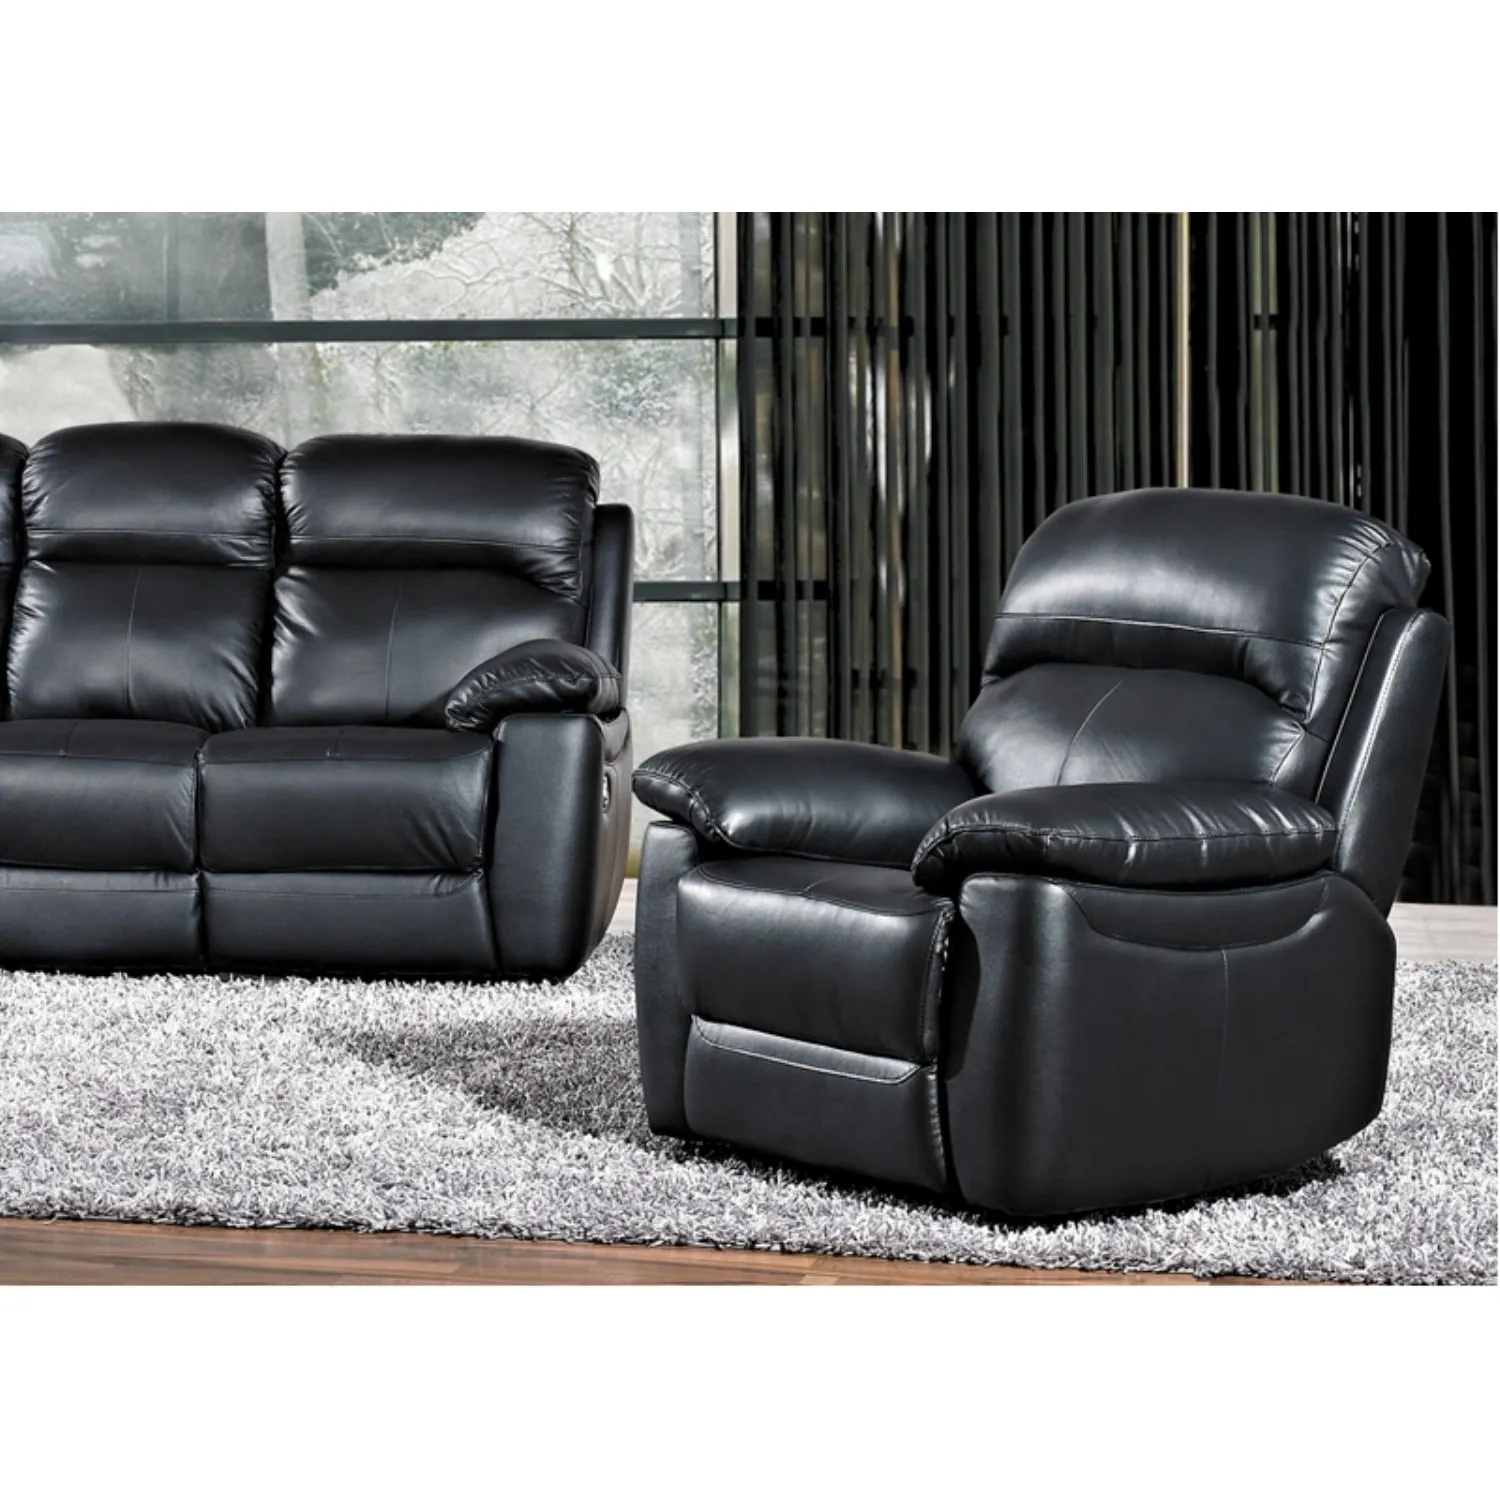 Black Leather Manual Recliner Armchair